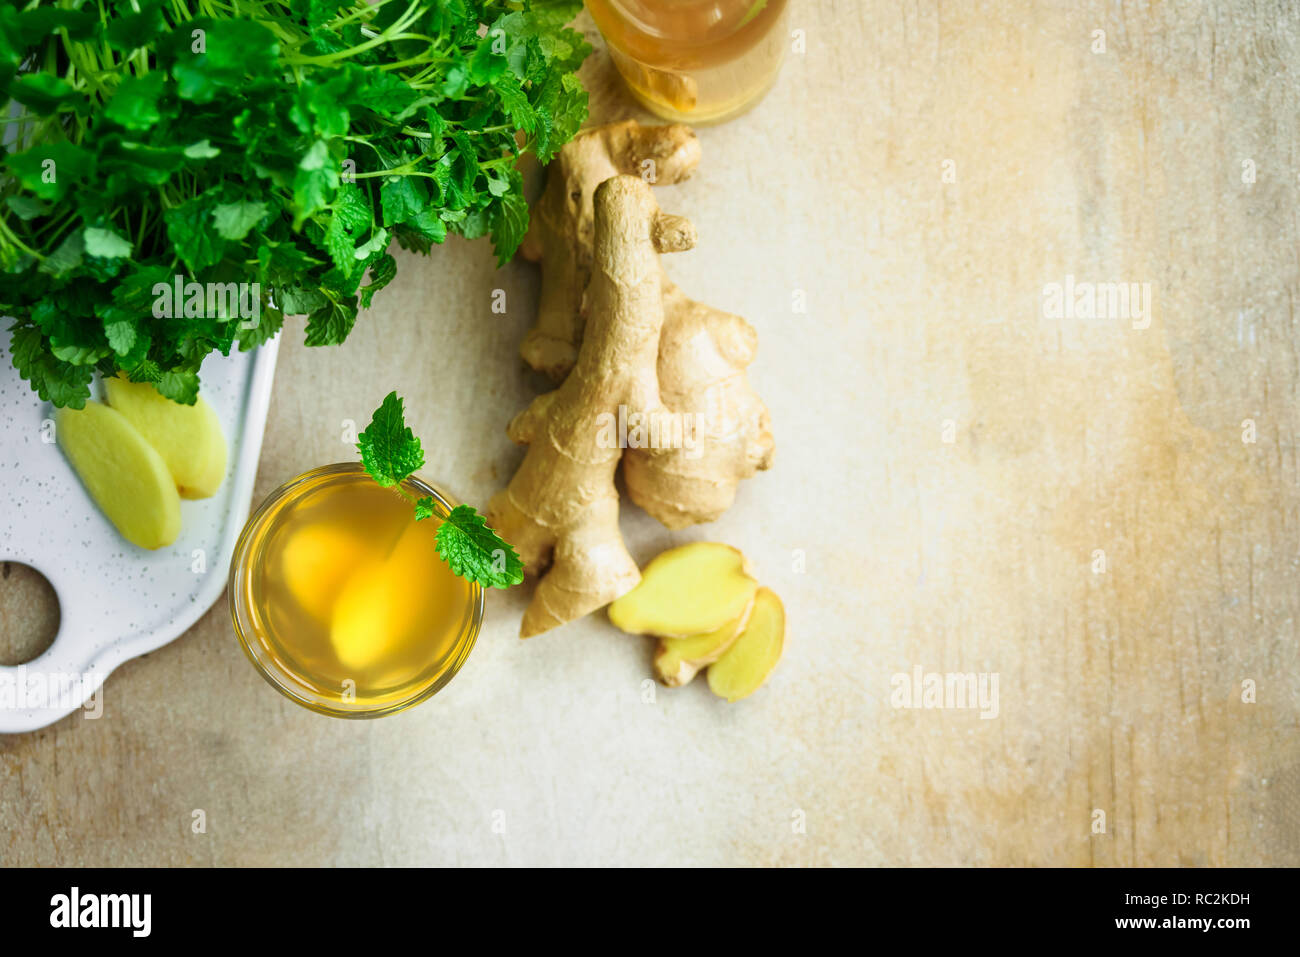 Glass with ginger detox water and ingredients near it. Wooden background. Top view. Copy space Stock Photo